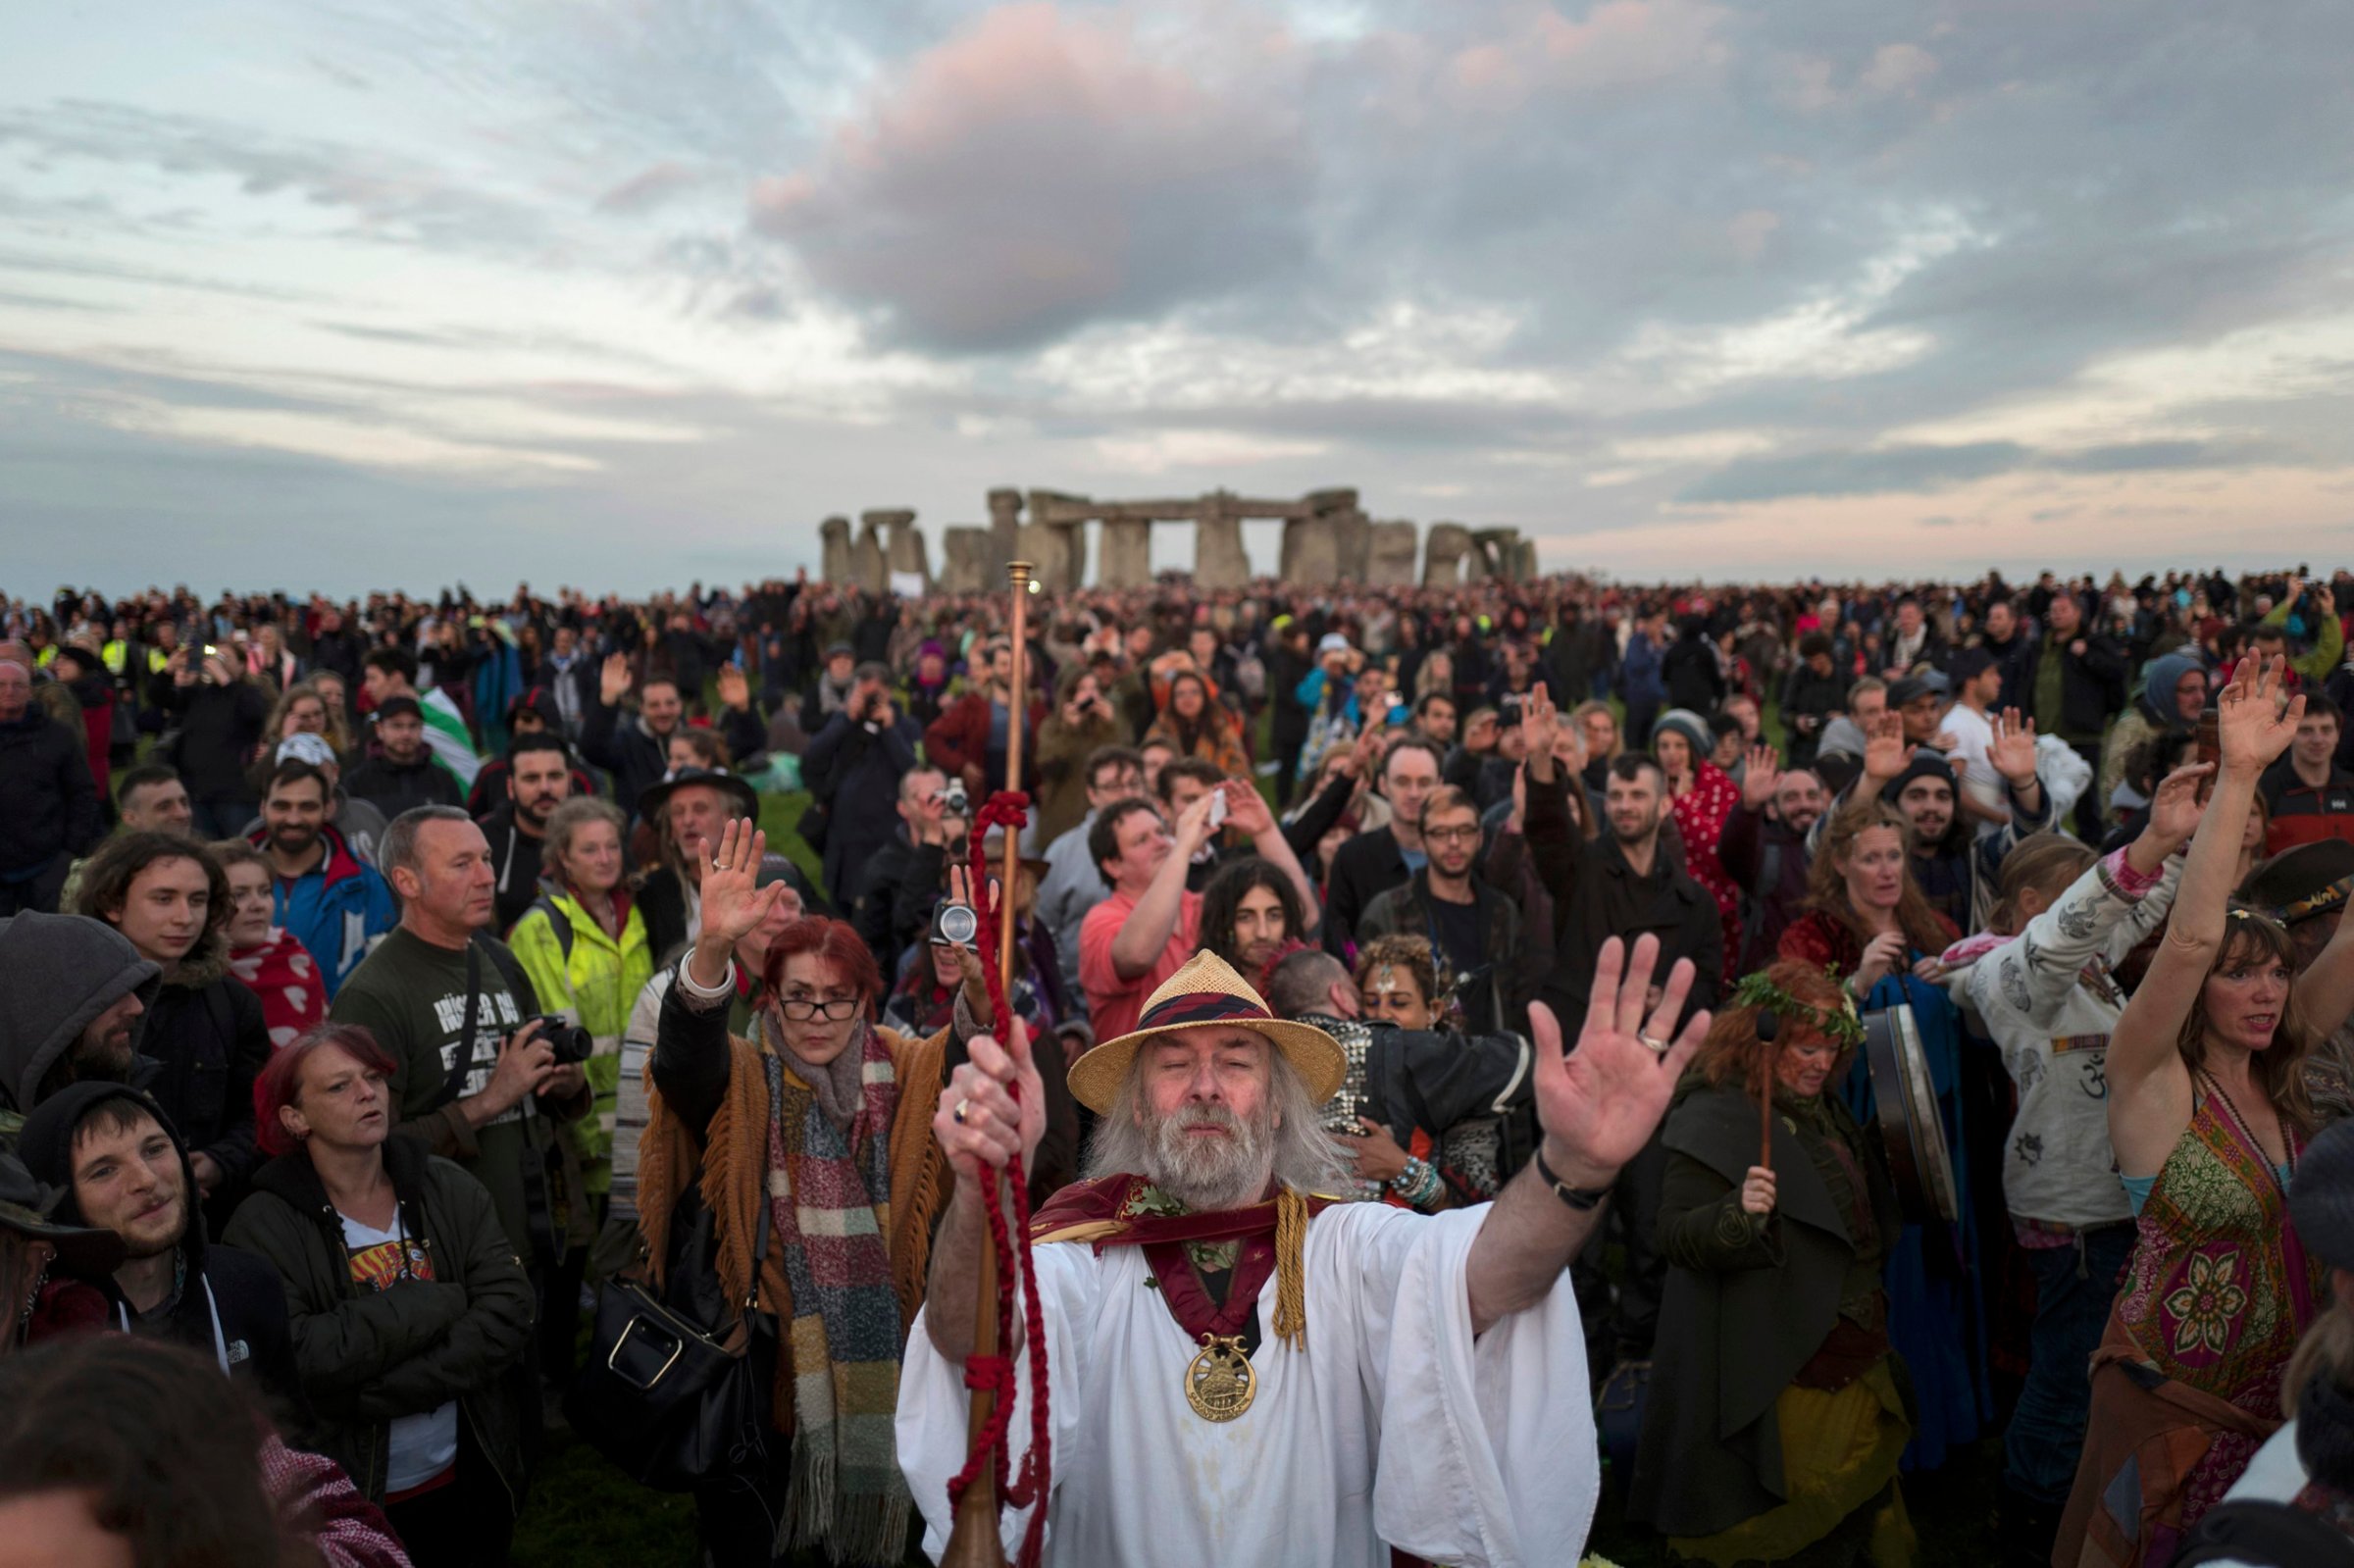 Revellers celebrate the summer solstice at Stonehenge on Salisbury Plain in southern England, on June 21, 2016.